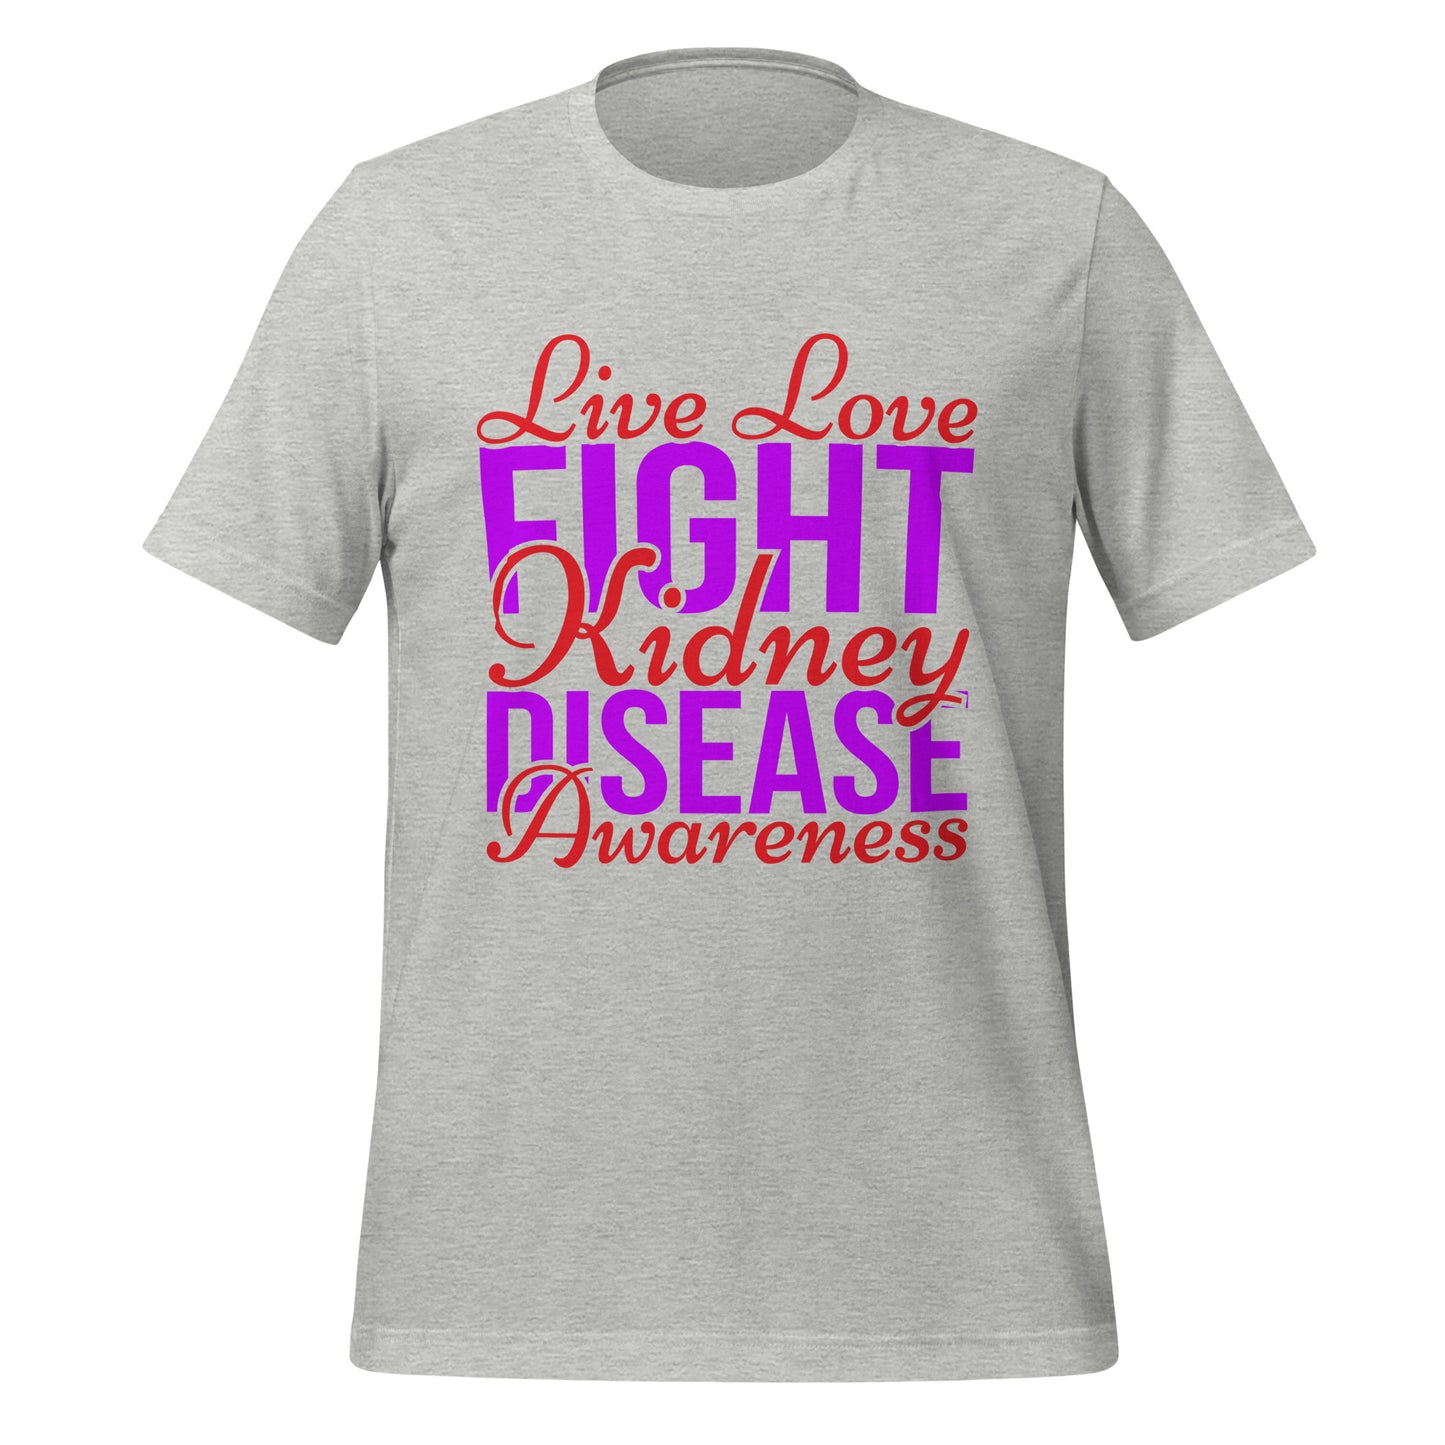 Kidney Awareness Quality Cotton Bella Canvas Adult T-Shirt